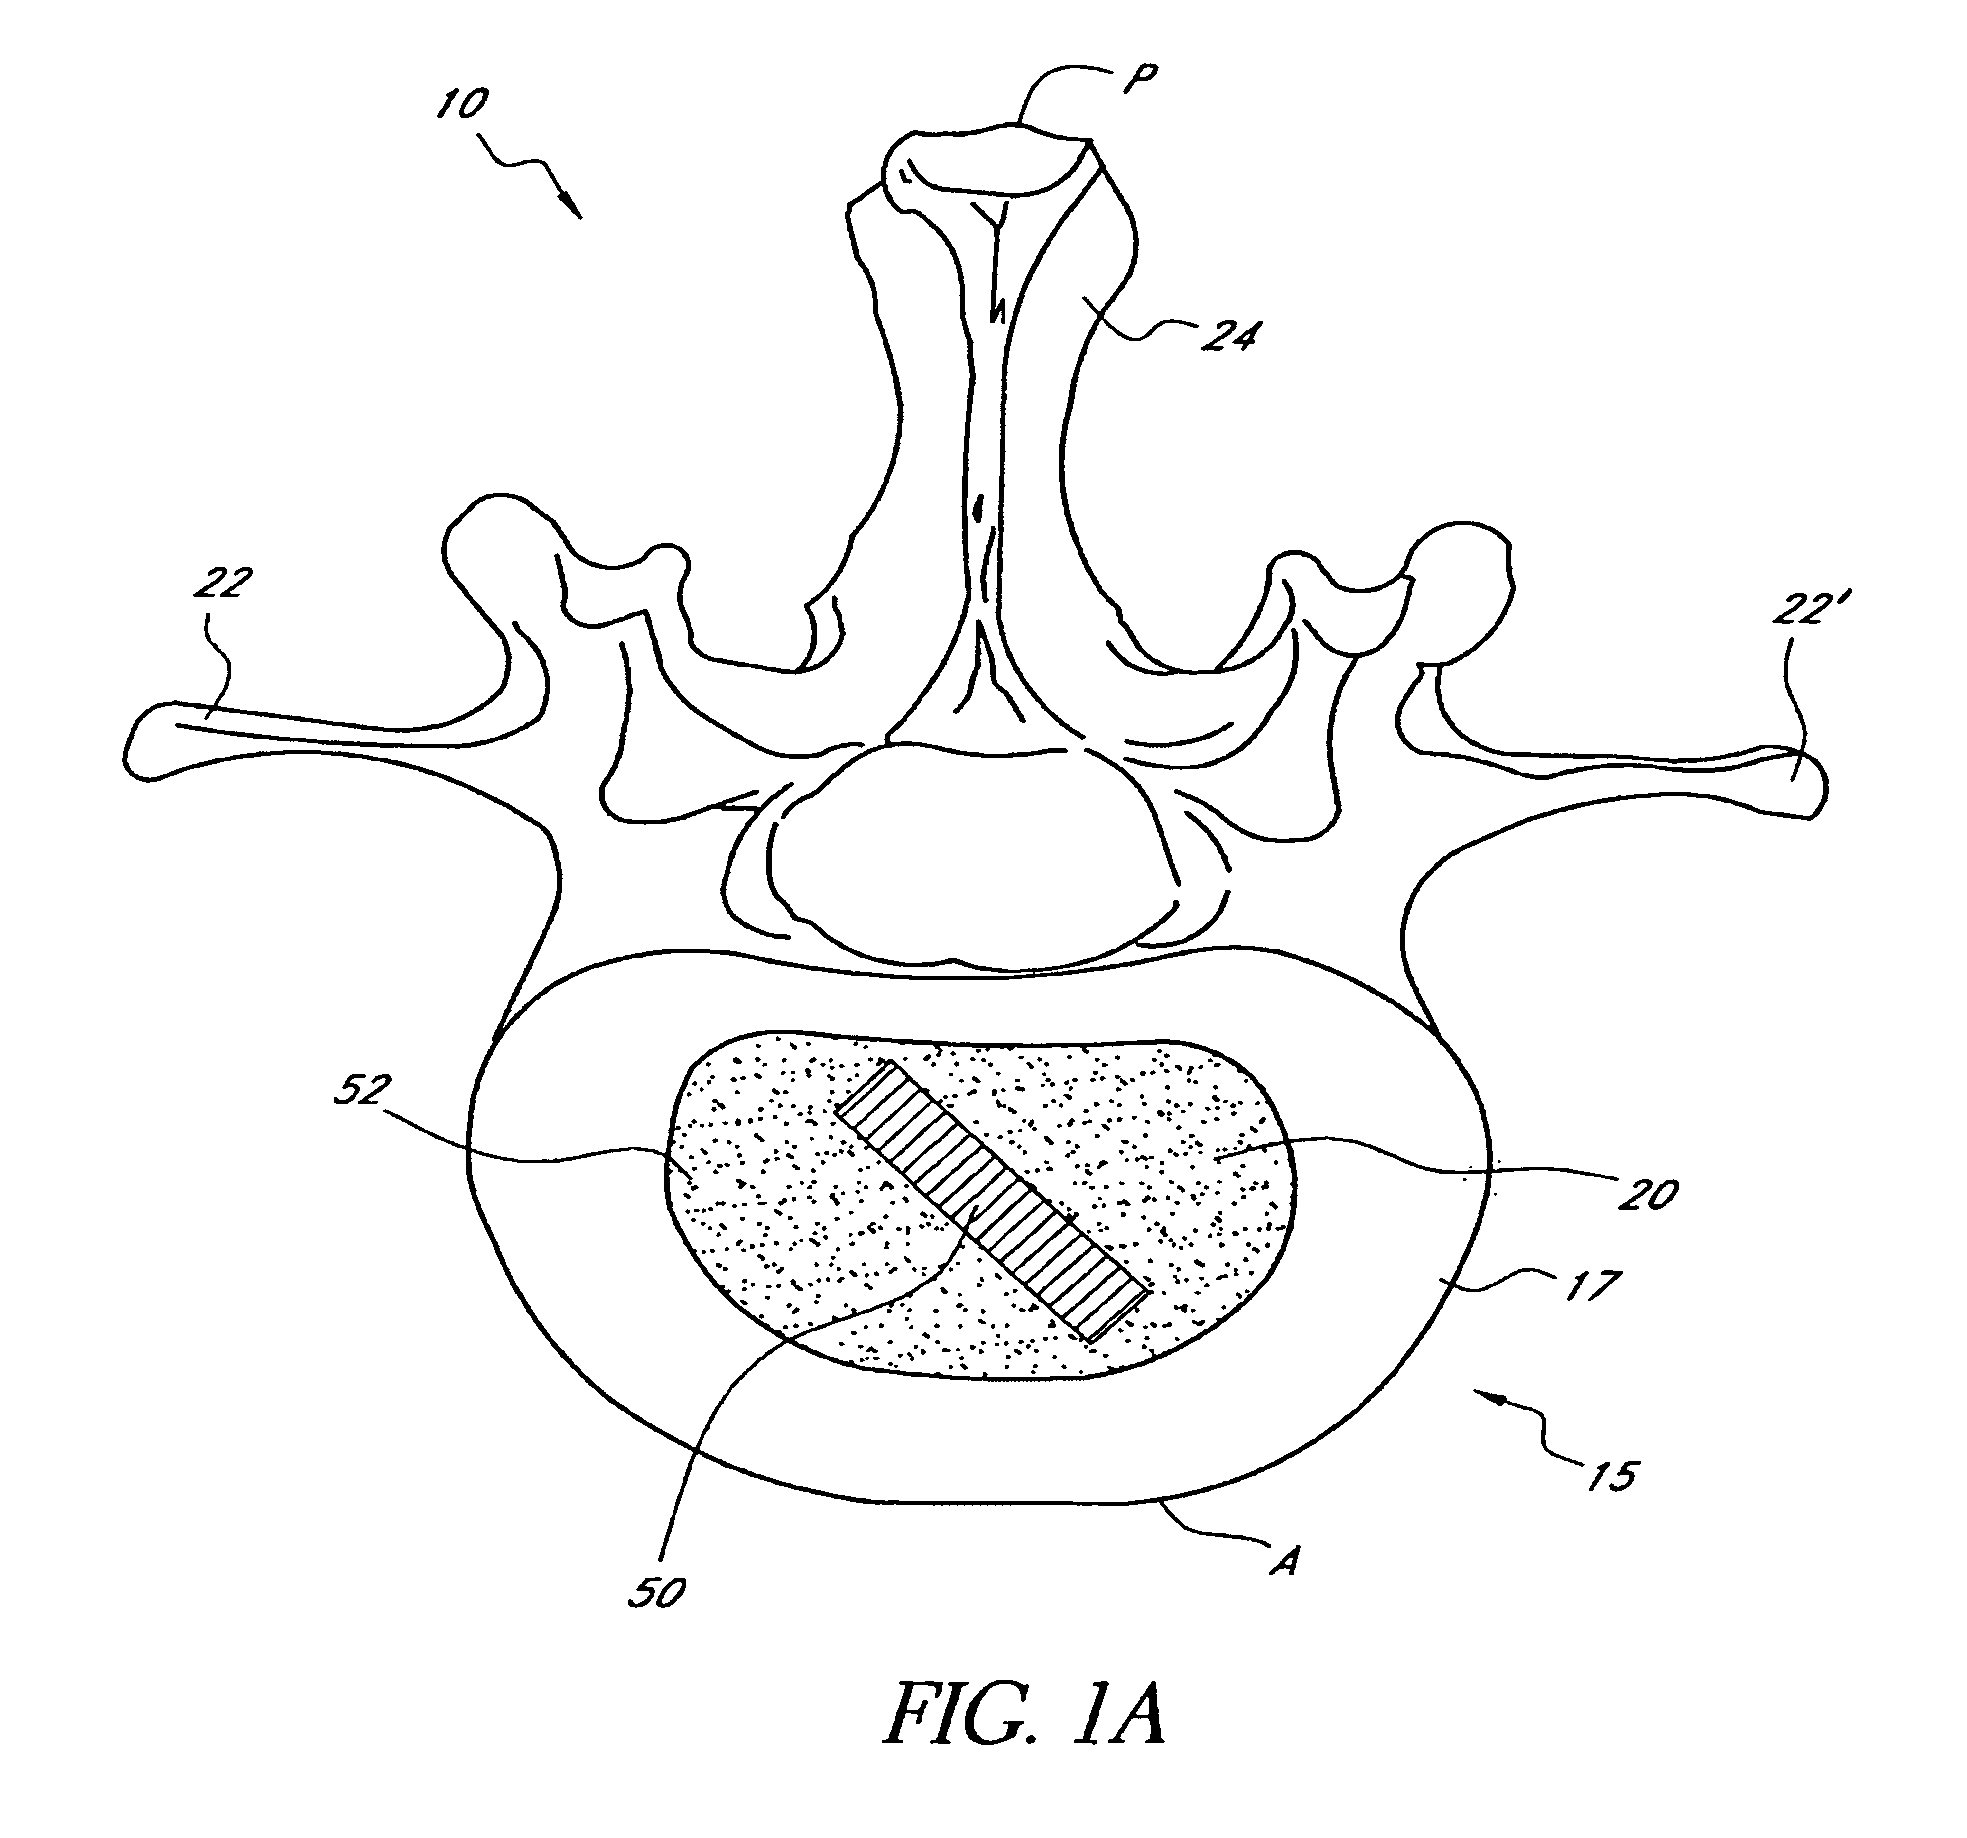 Method of treating a herniated disc